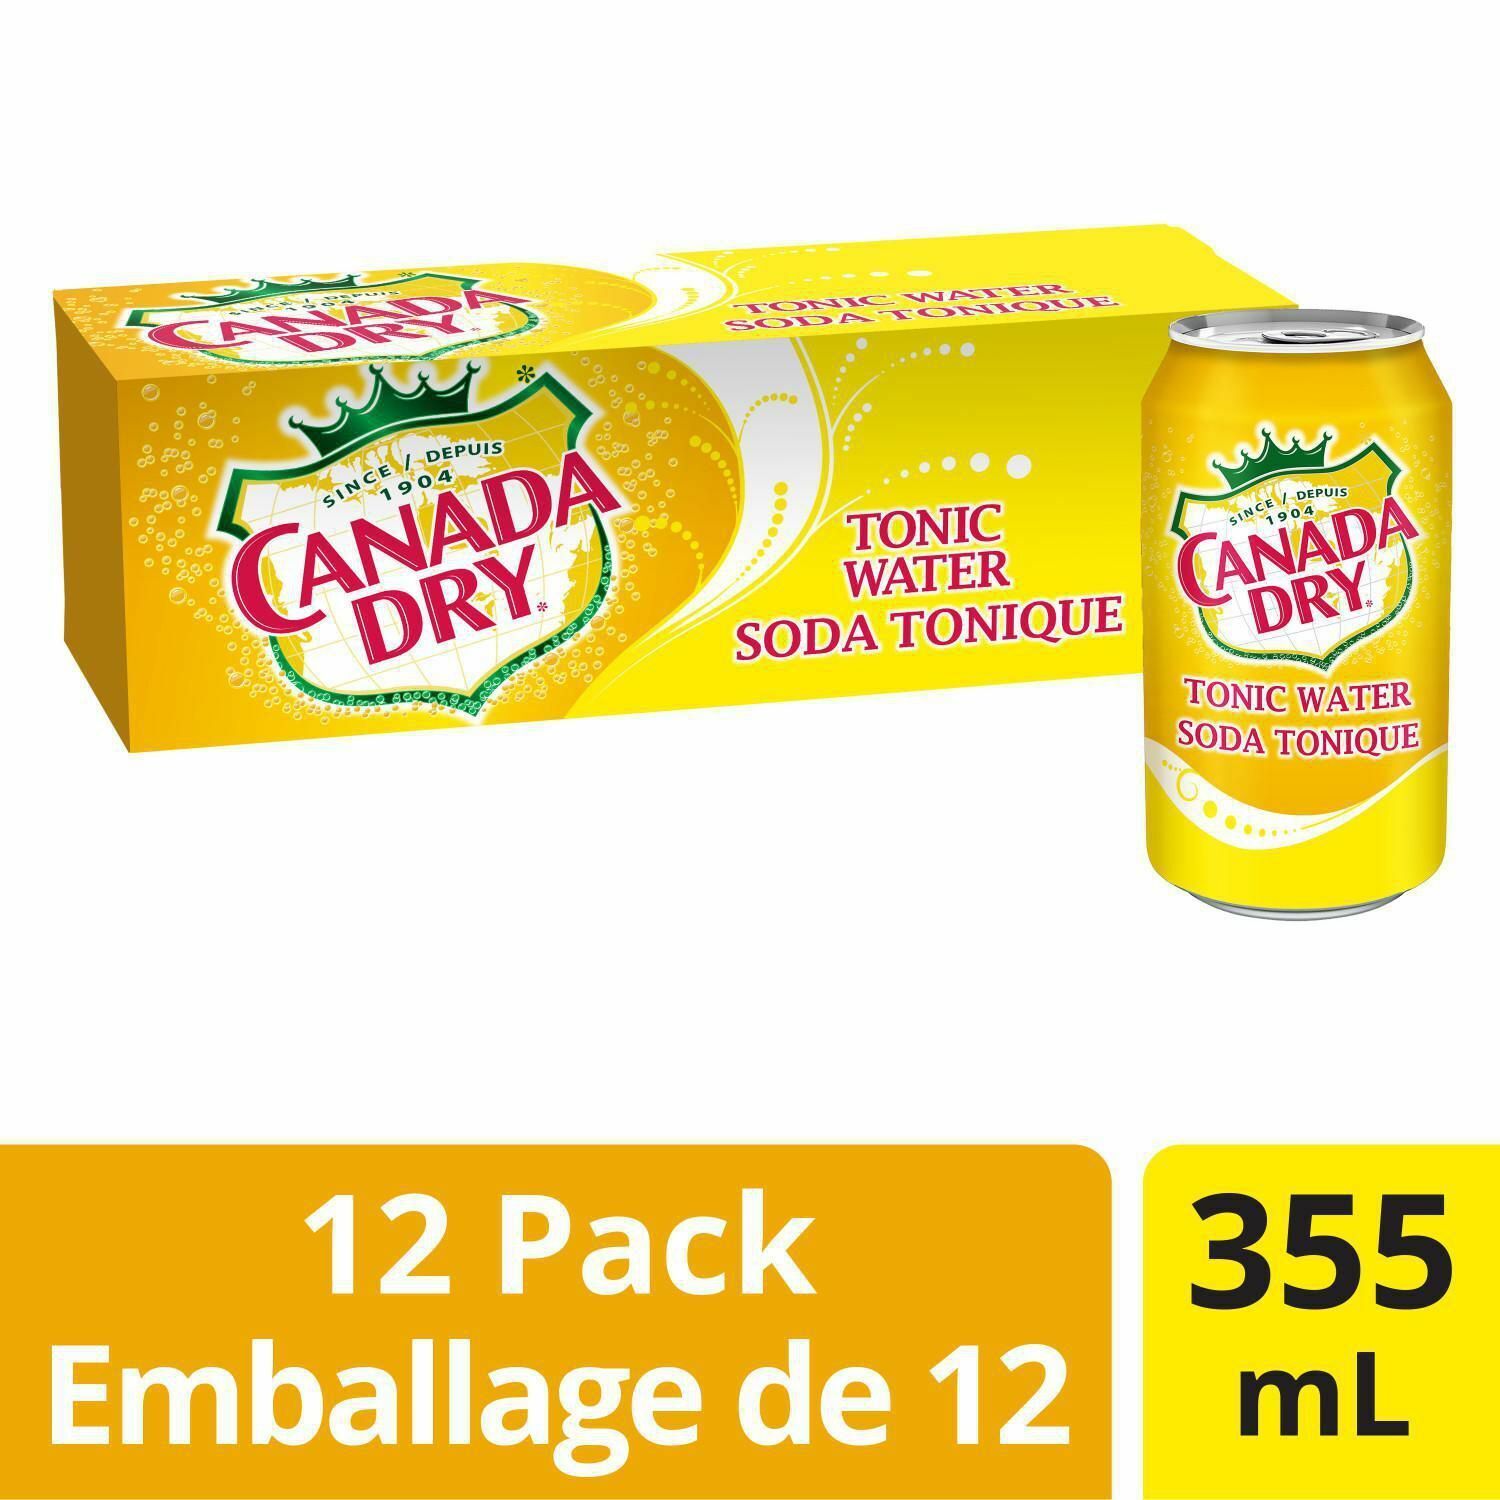 2 X 12 Cans of Canada Dry Tonic Water 355ml Each Can -From Canada- Free Shipping - $52.25